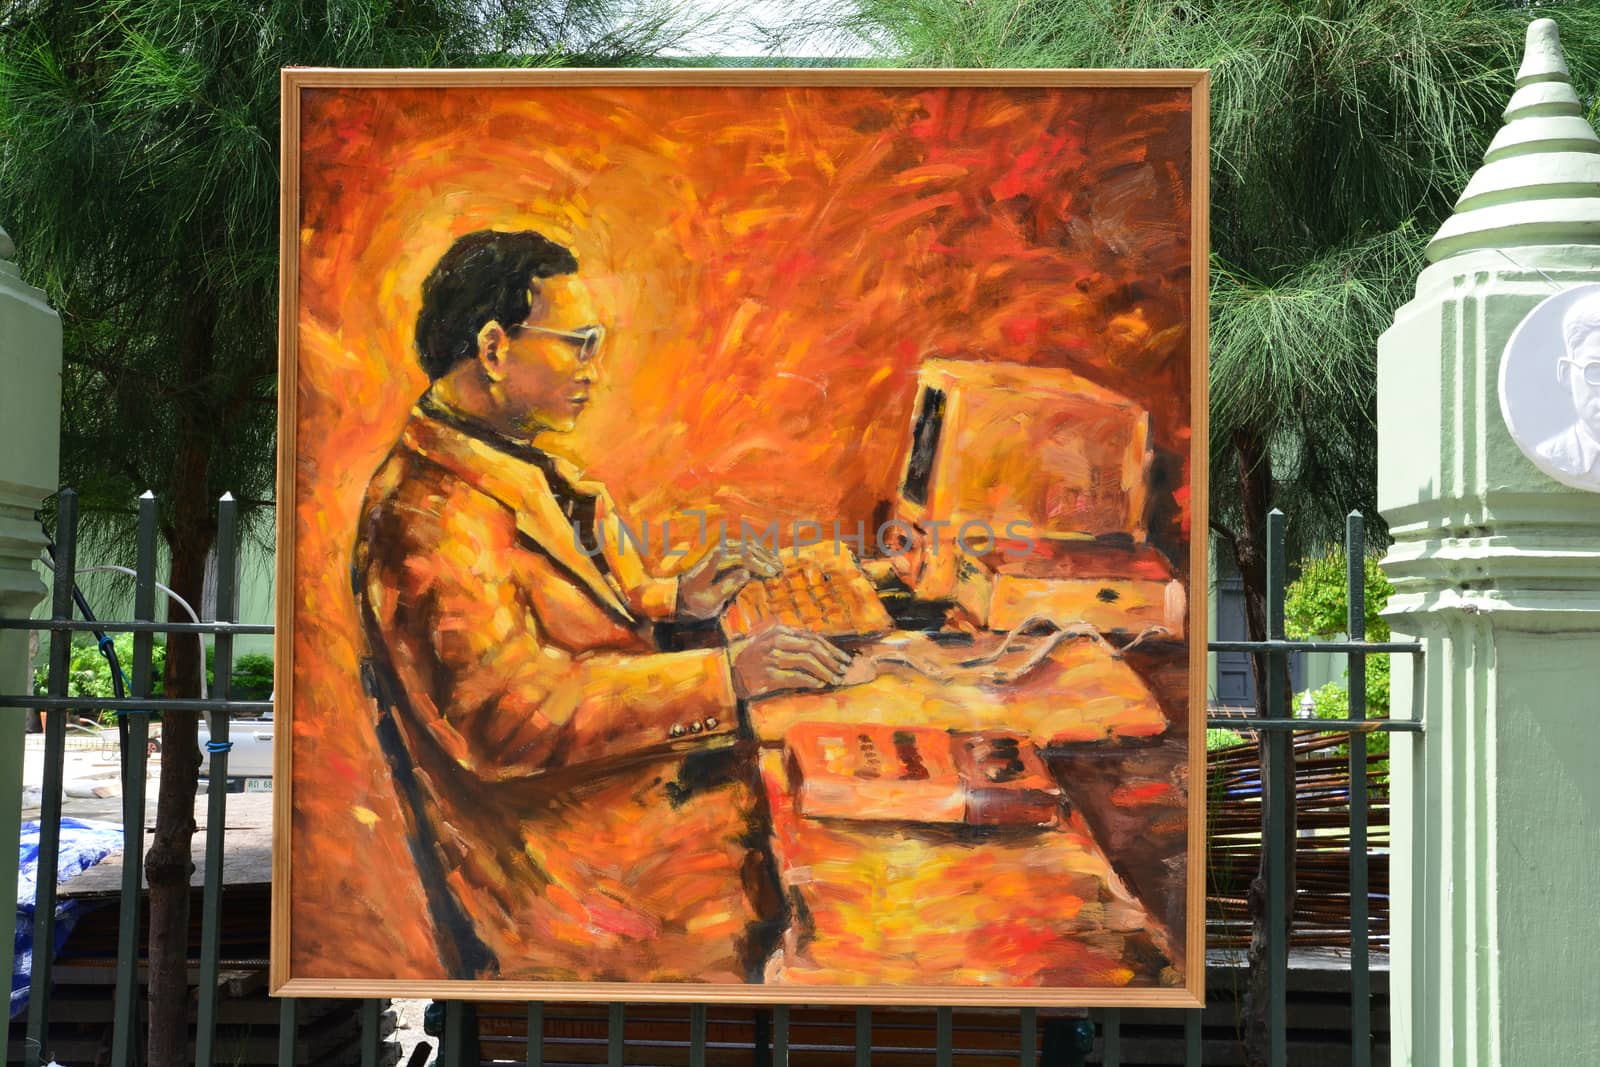 Thai art students painting of His Majesty King Bhumibol portrait by ideation90